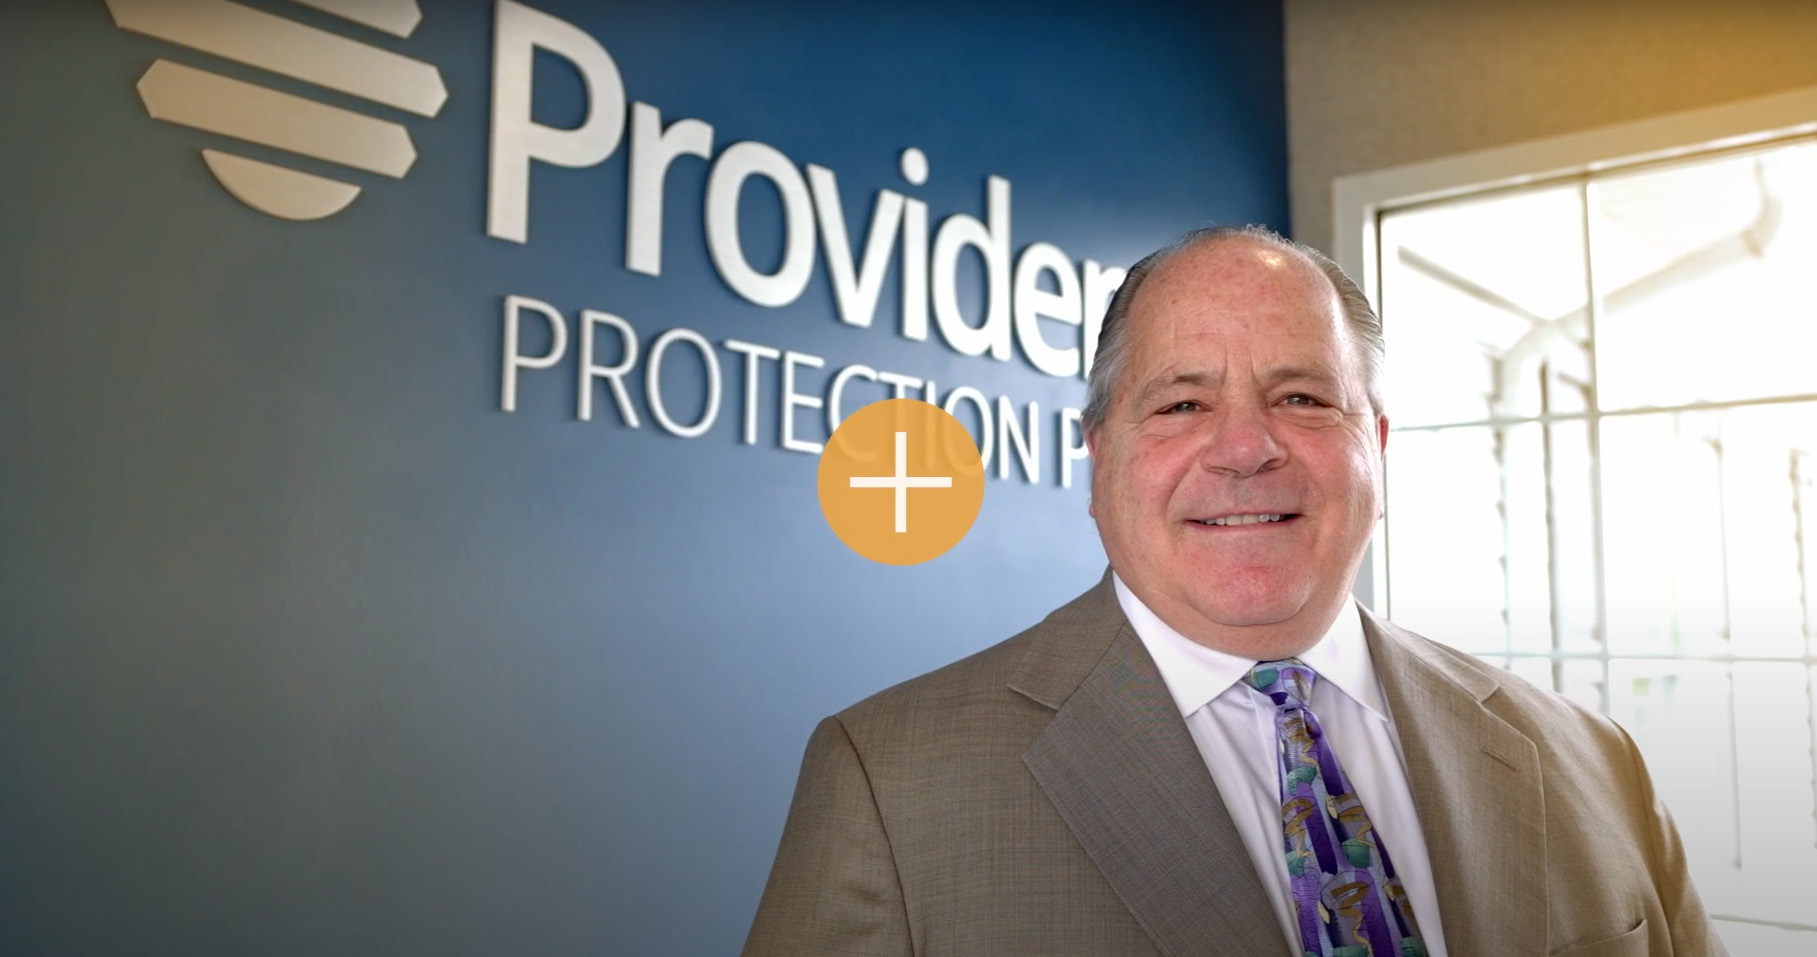 Provident Protection Plus